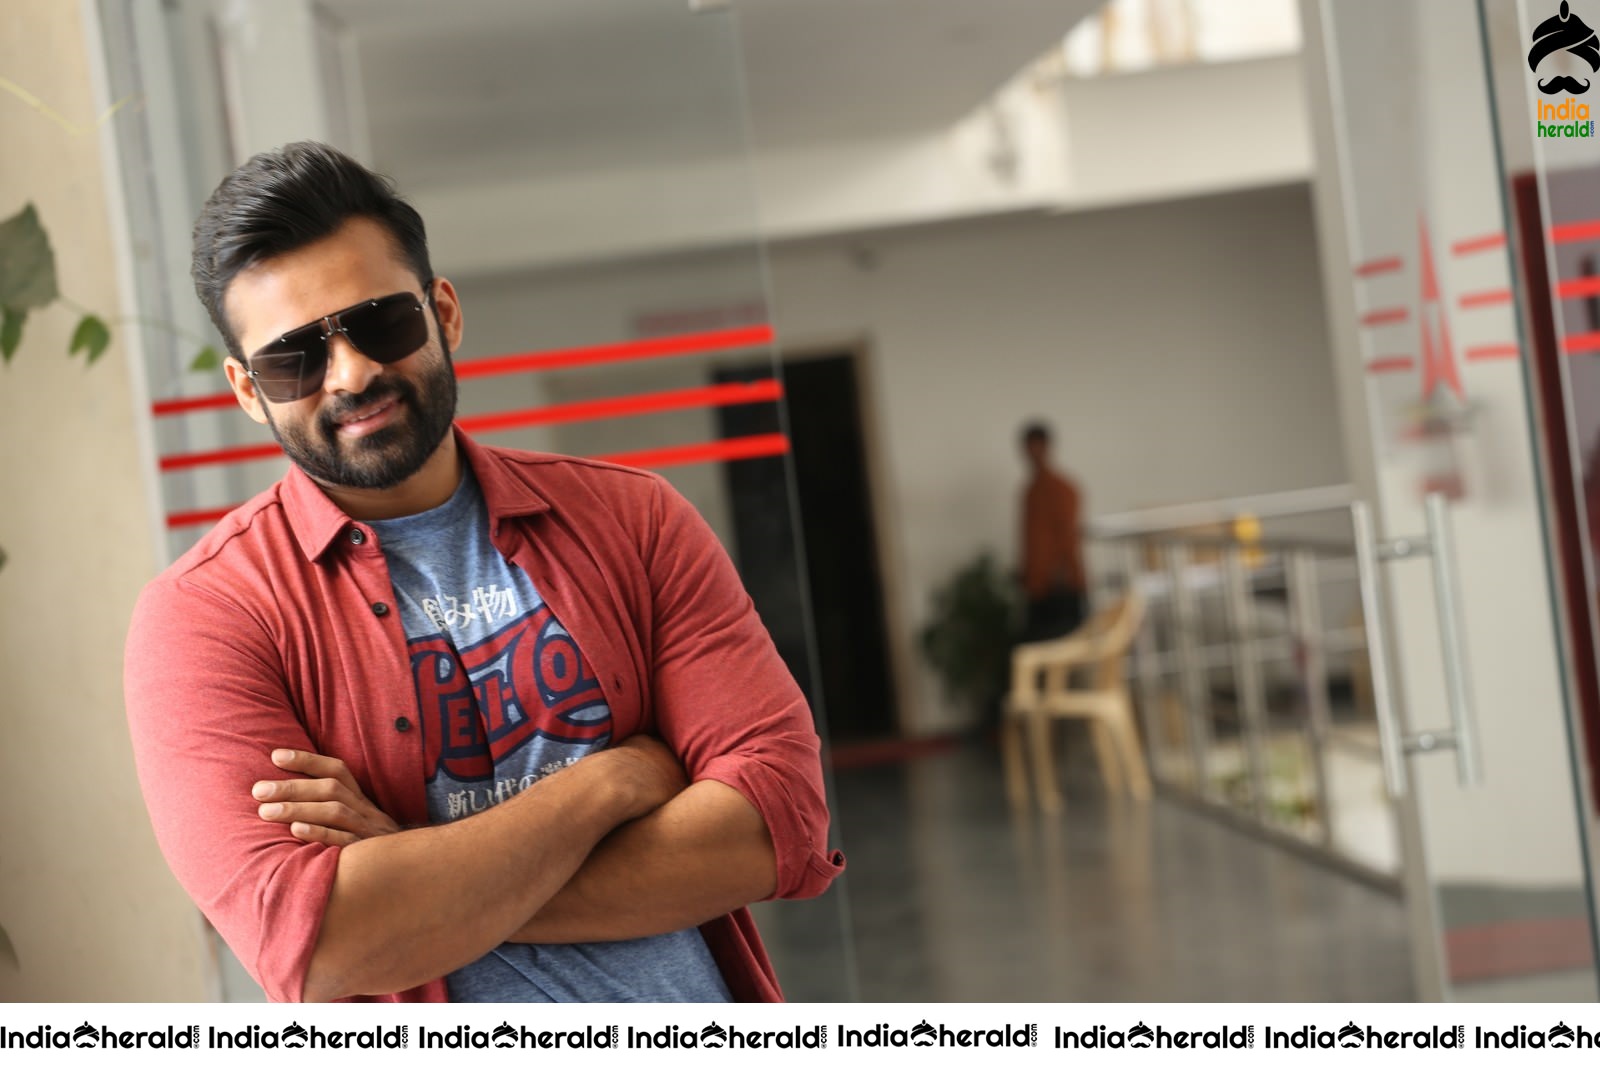 Actor Sai Dharam Tej is looking smart and stylish in these Photos